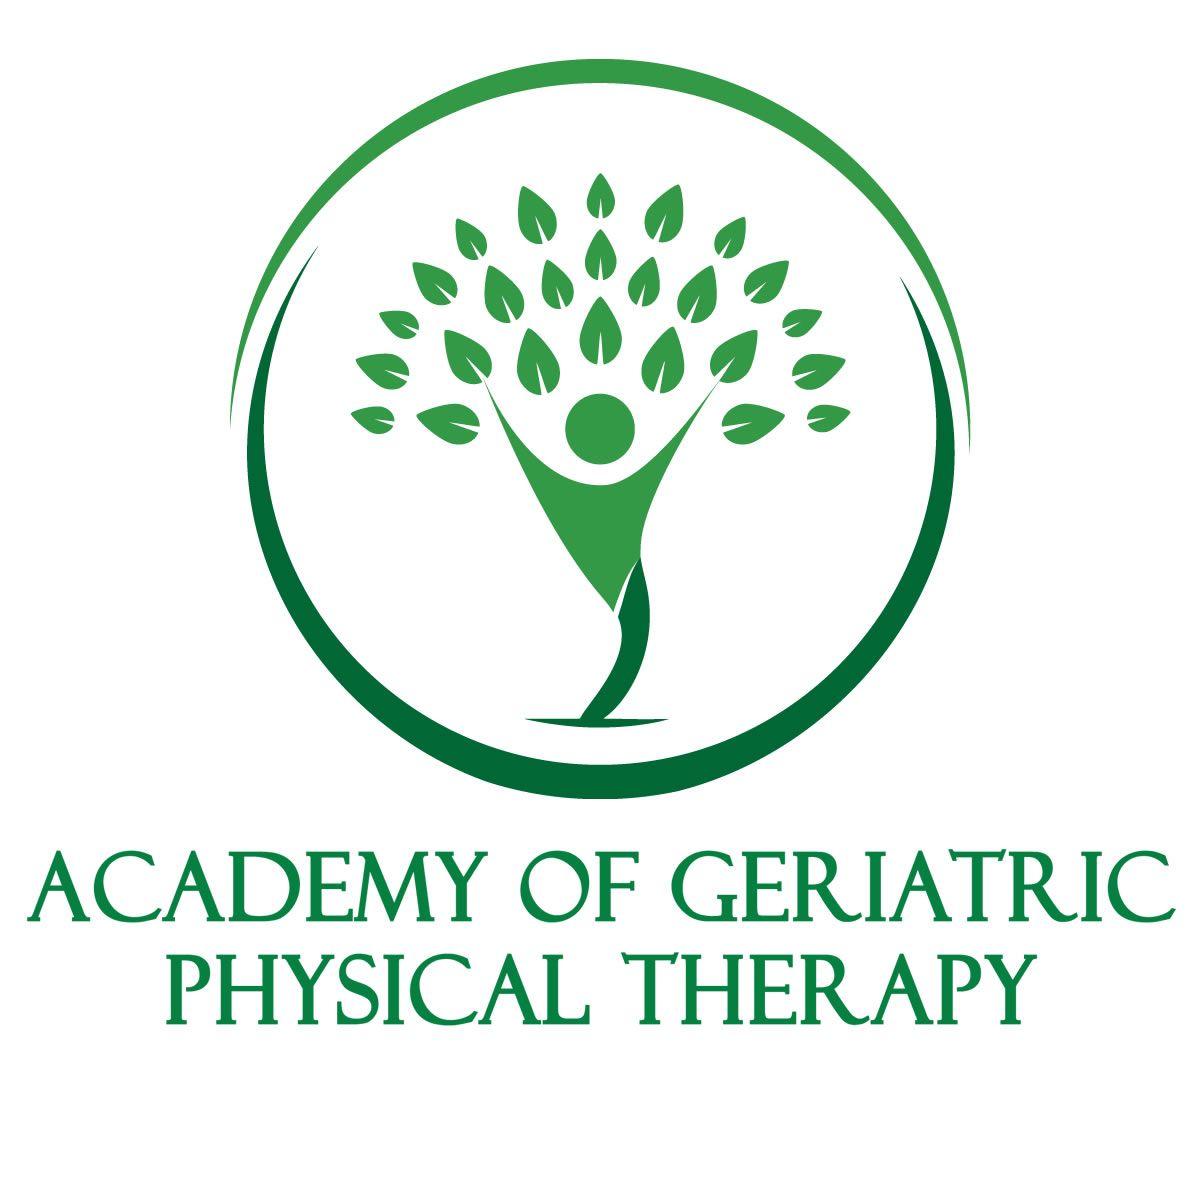 Physical Theray Logo - Home Page -Academy of Geriatric Physical Therapy - GeriatricsPT.org